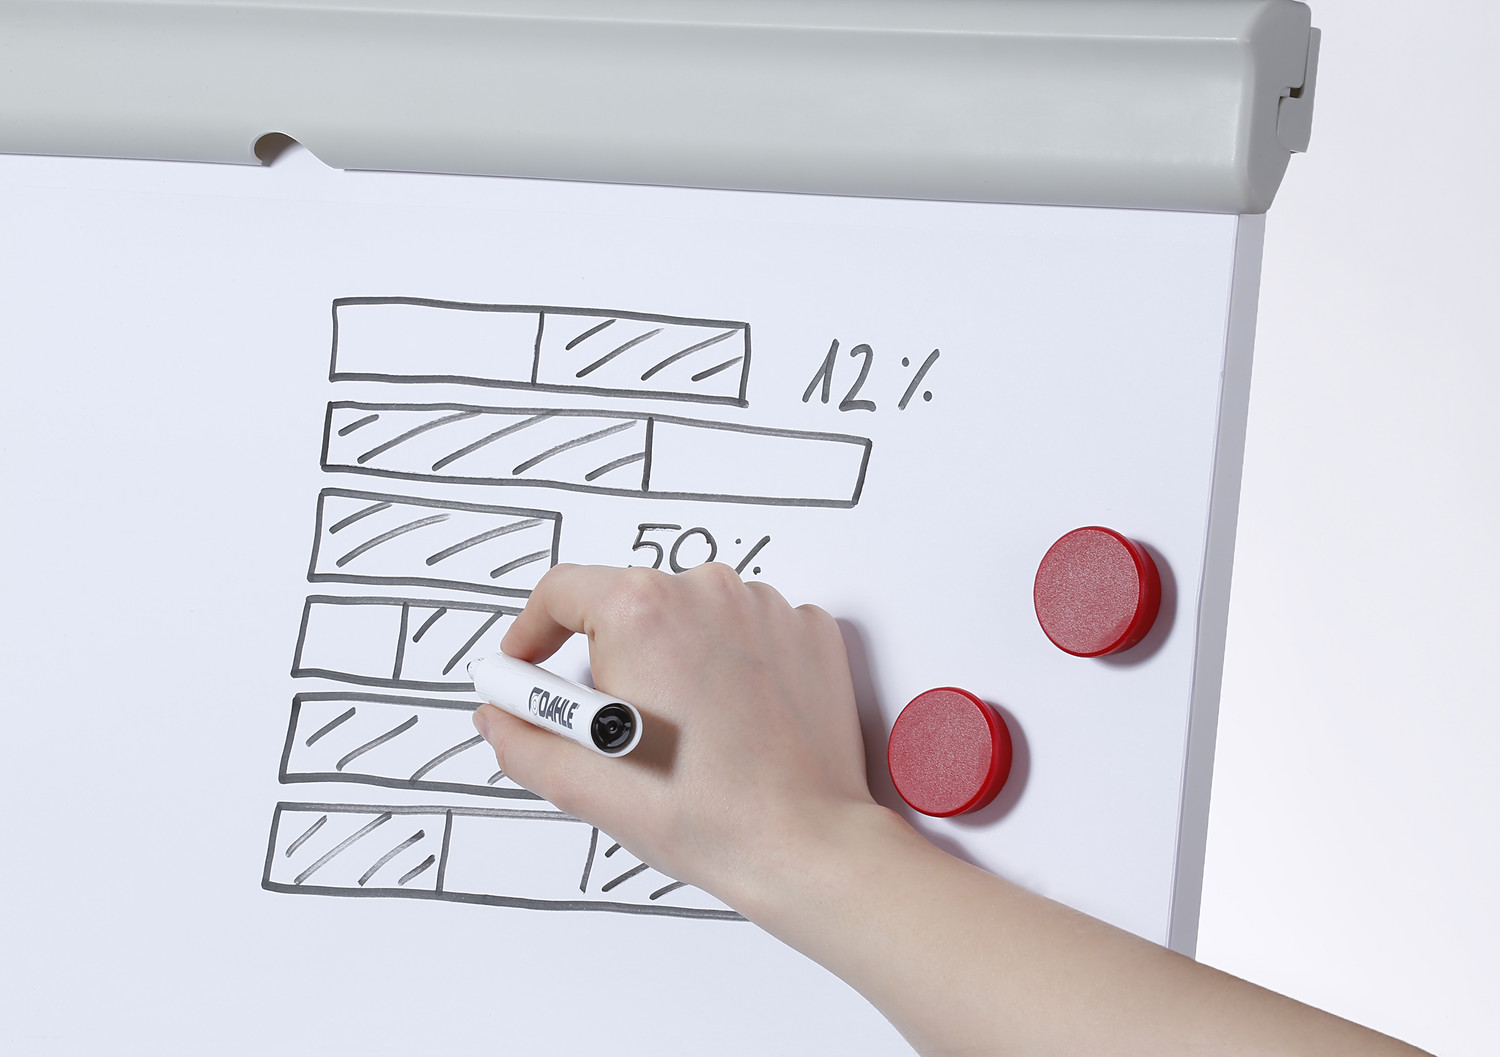 Take notes, create drafts, structure information – flip charts by Dahle are the perfect choice for interactive meetings and presentations